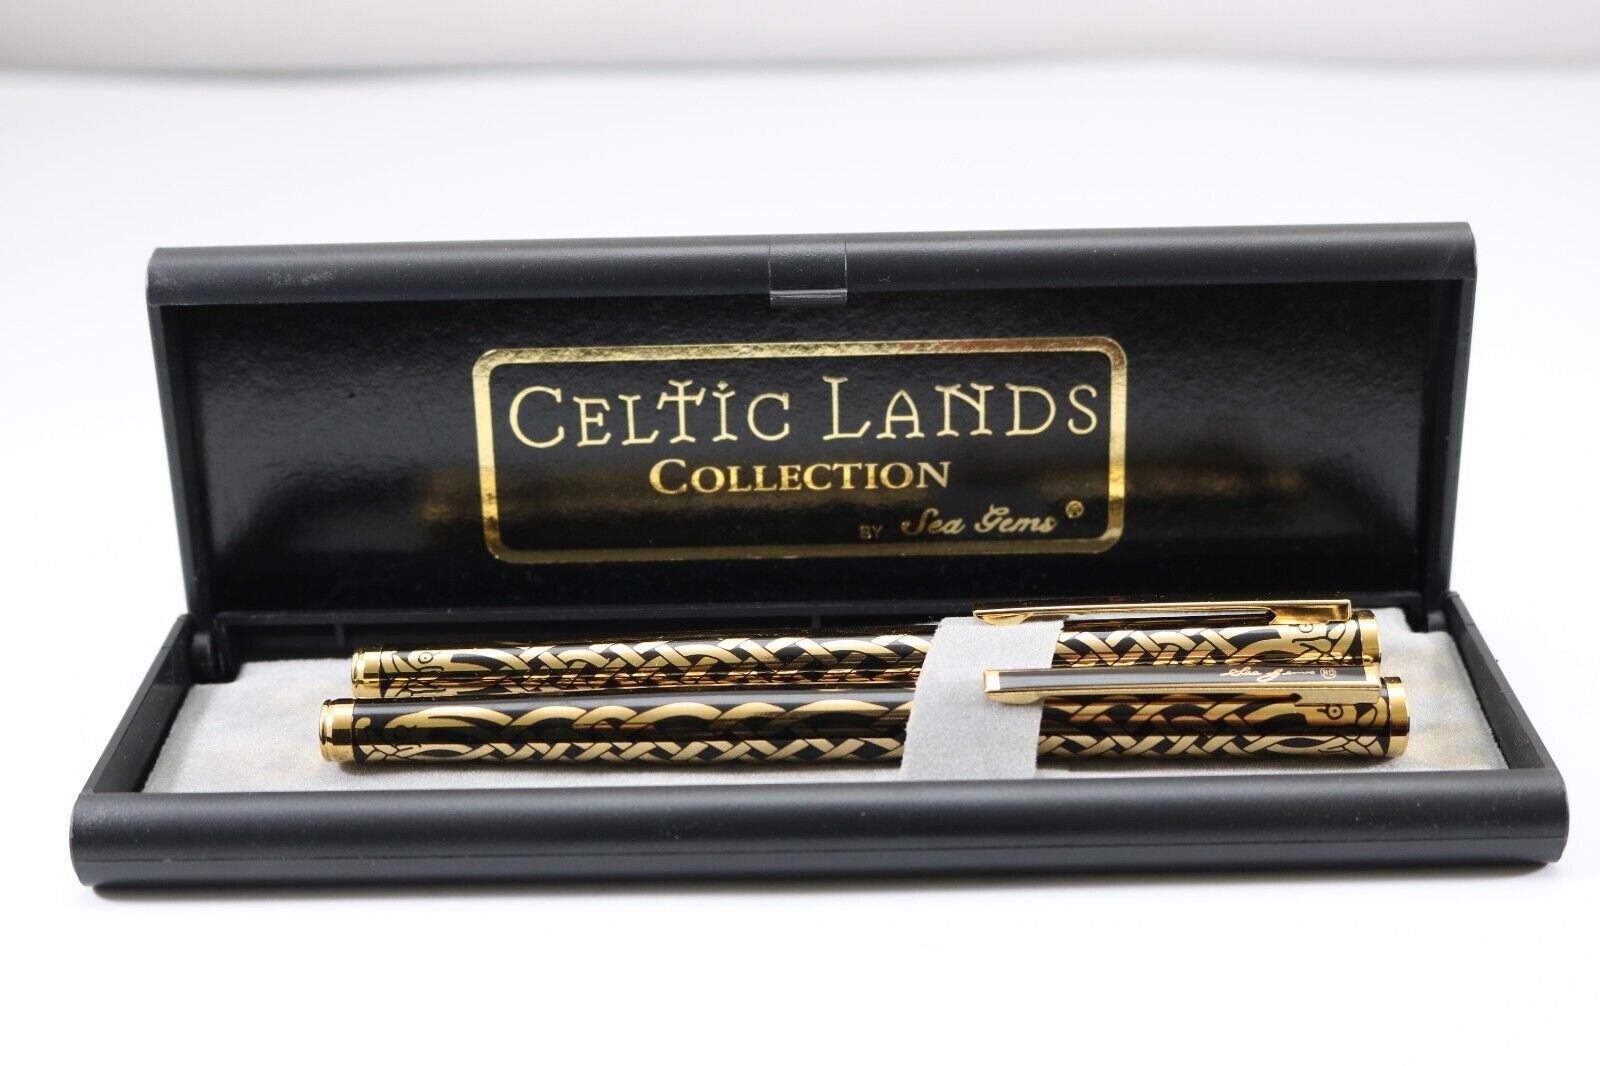 Vintage Celtic Lands Collection by Sea Gems Fountain & Rollerball Pen Set